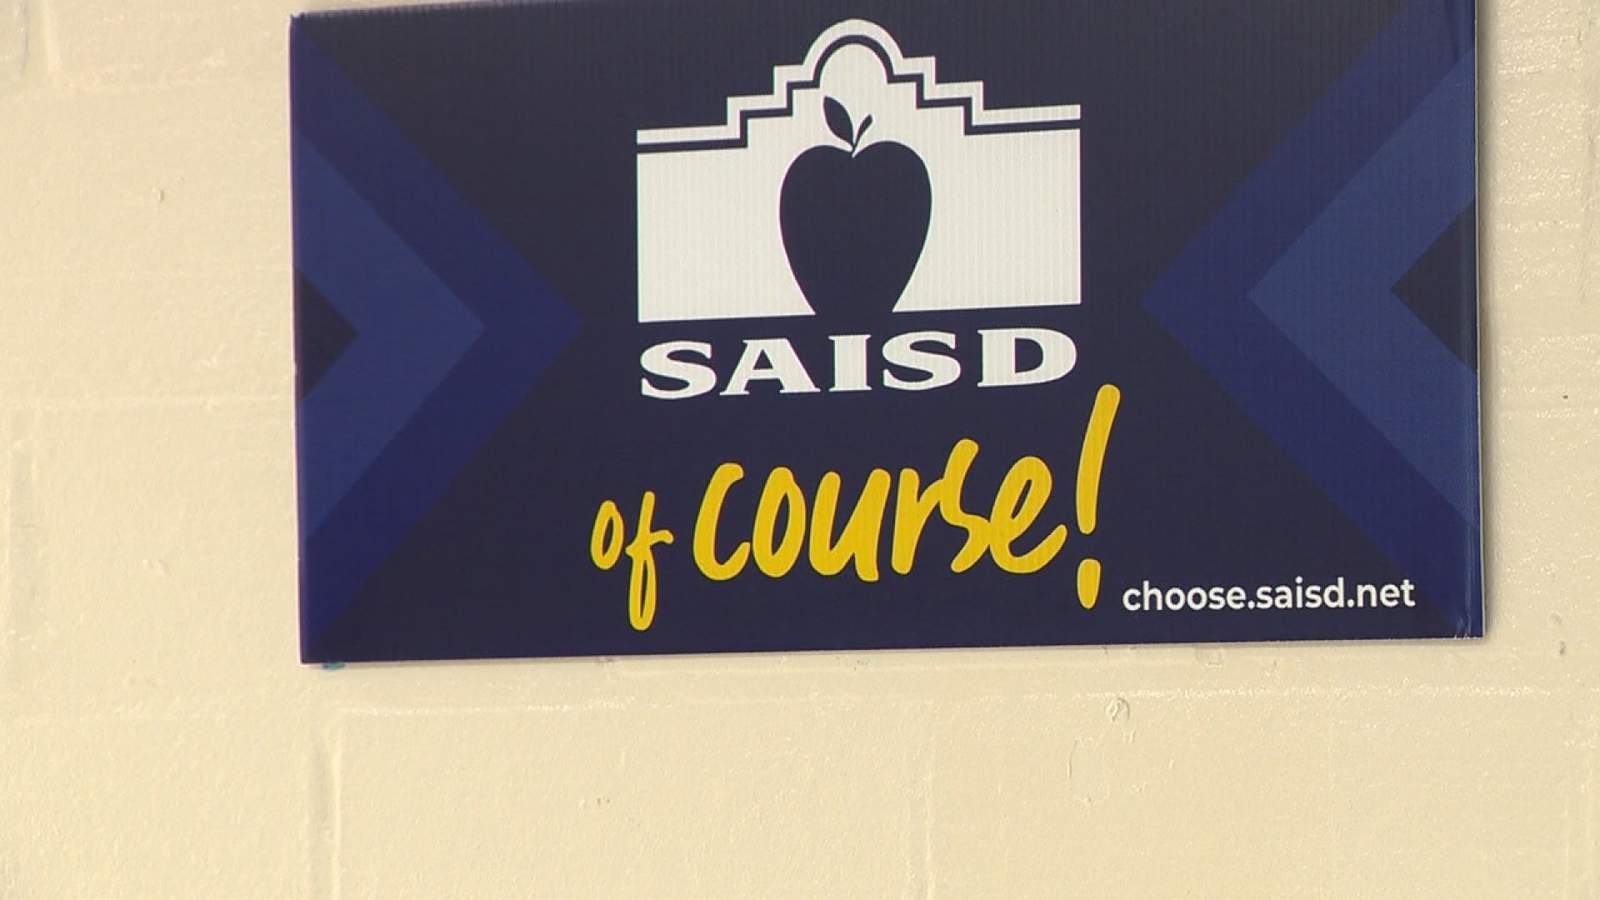 SAISD propositions worth $1.3 billion would pay for campus renovations, technology upgrades, more